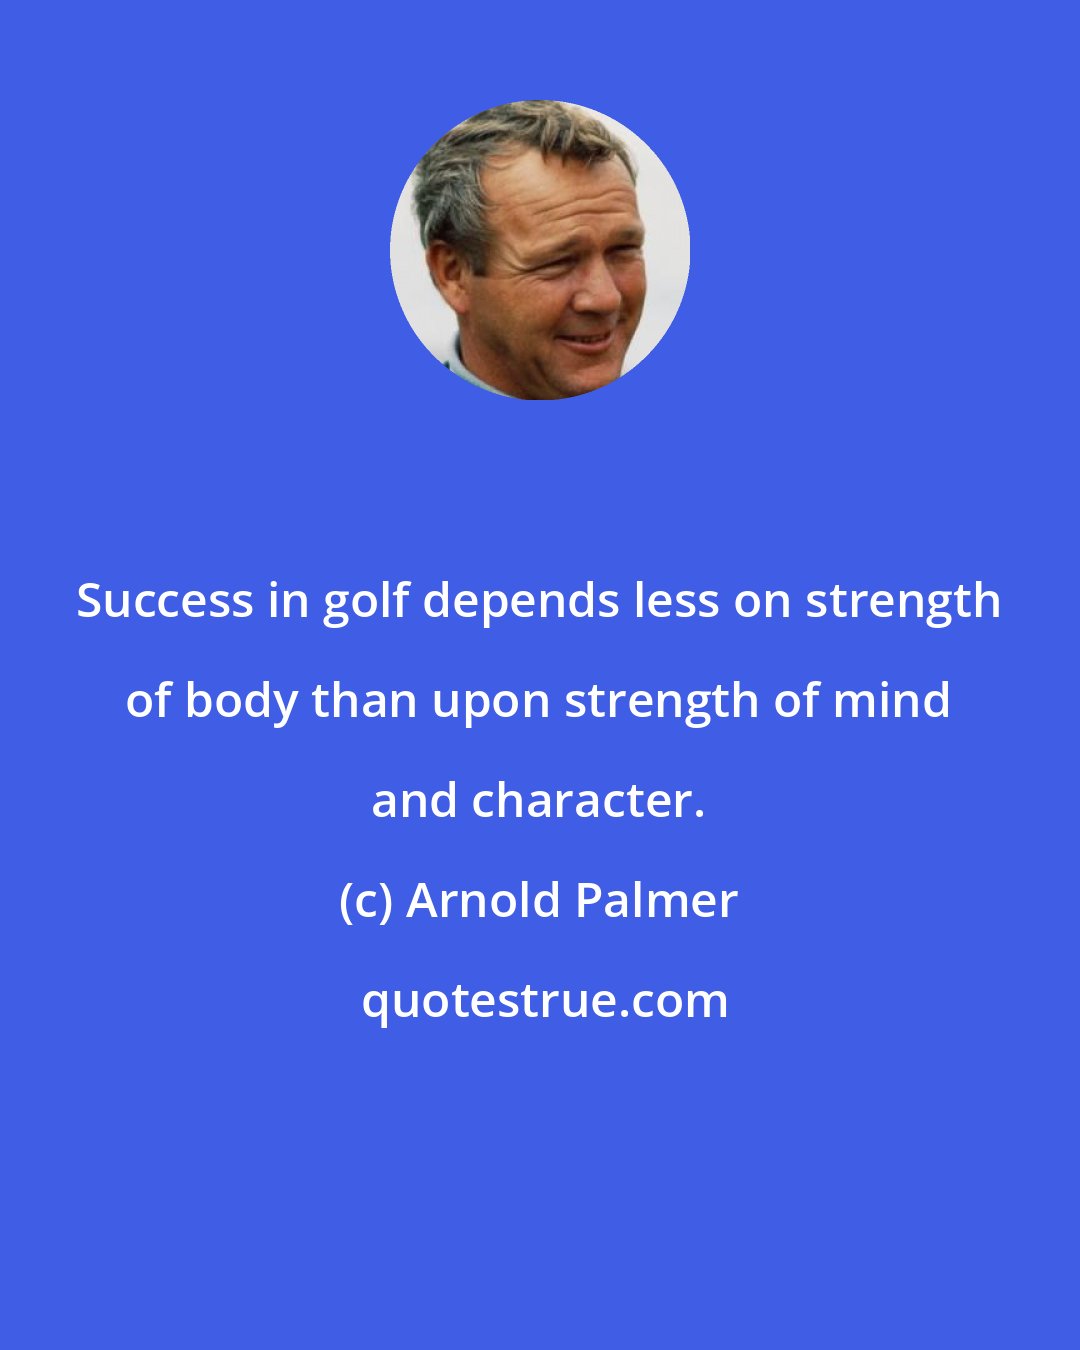 Arnold Palmer: Success in golf depends less on strength of body than upon strength of mind and character.